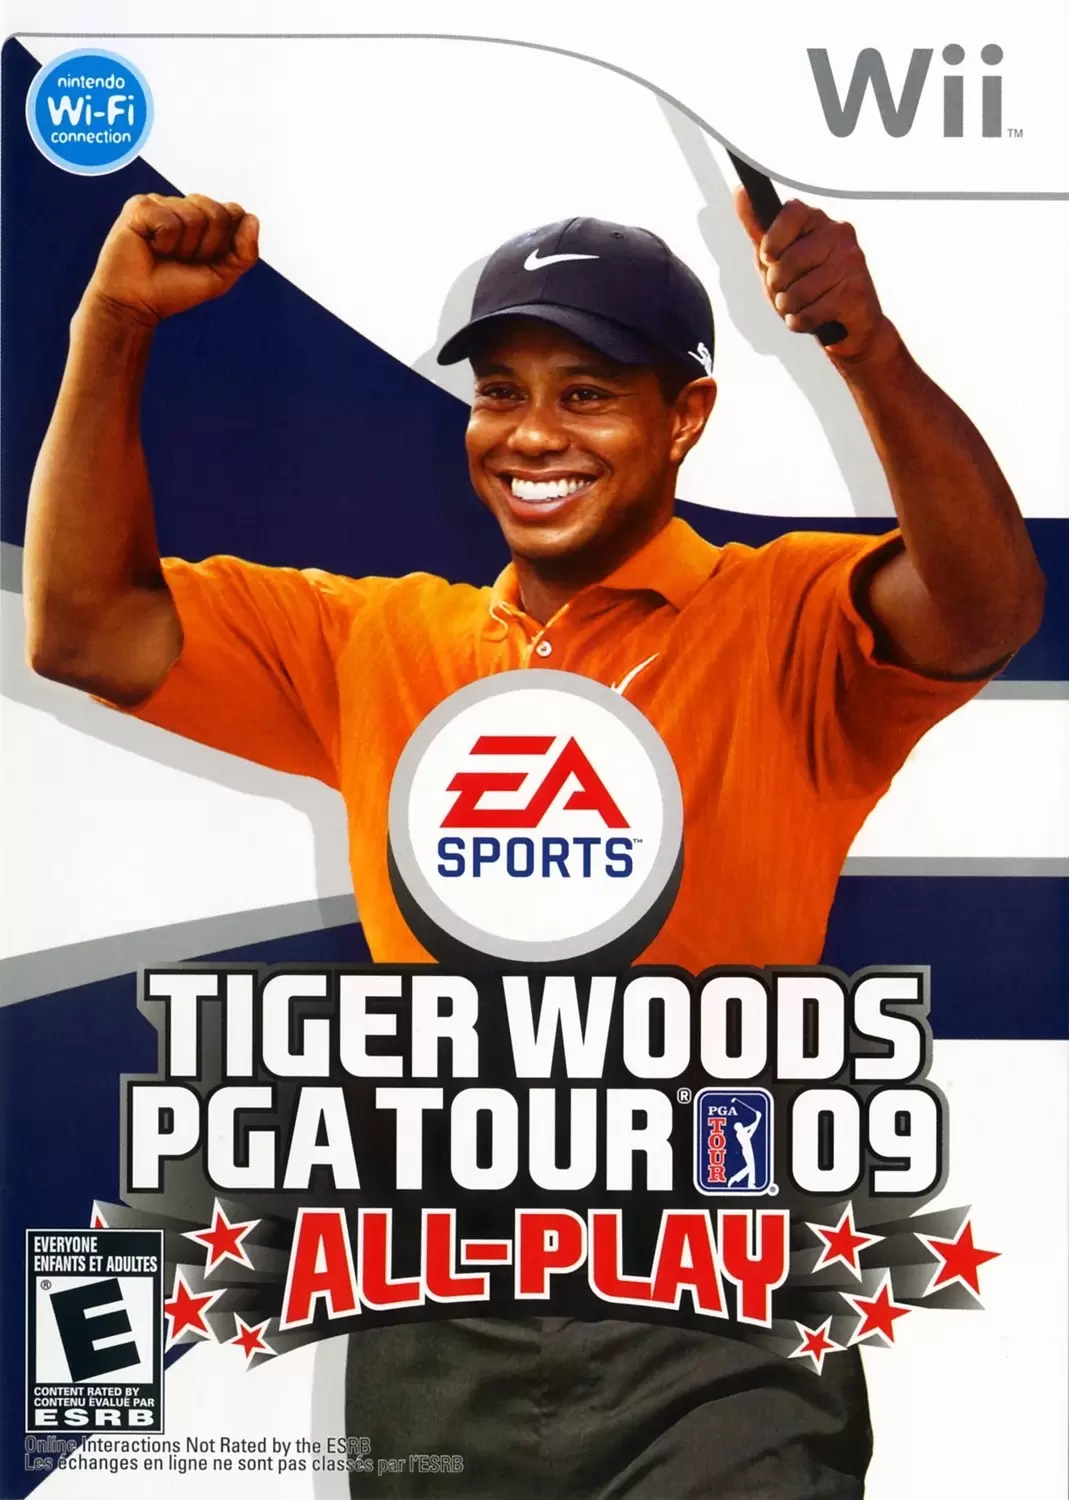 Jeux Nintendo Wii - Tiger Woods PGA Tour 09 All Play